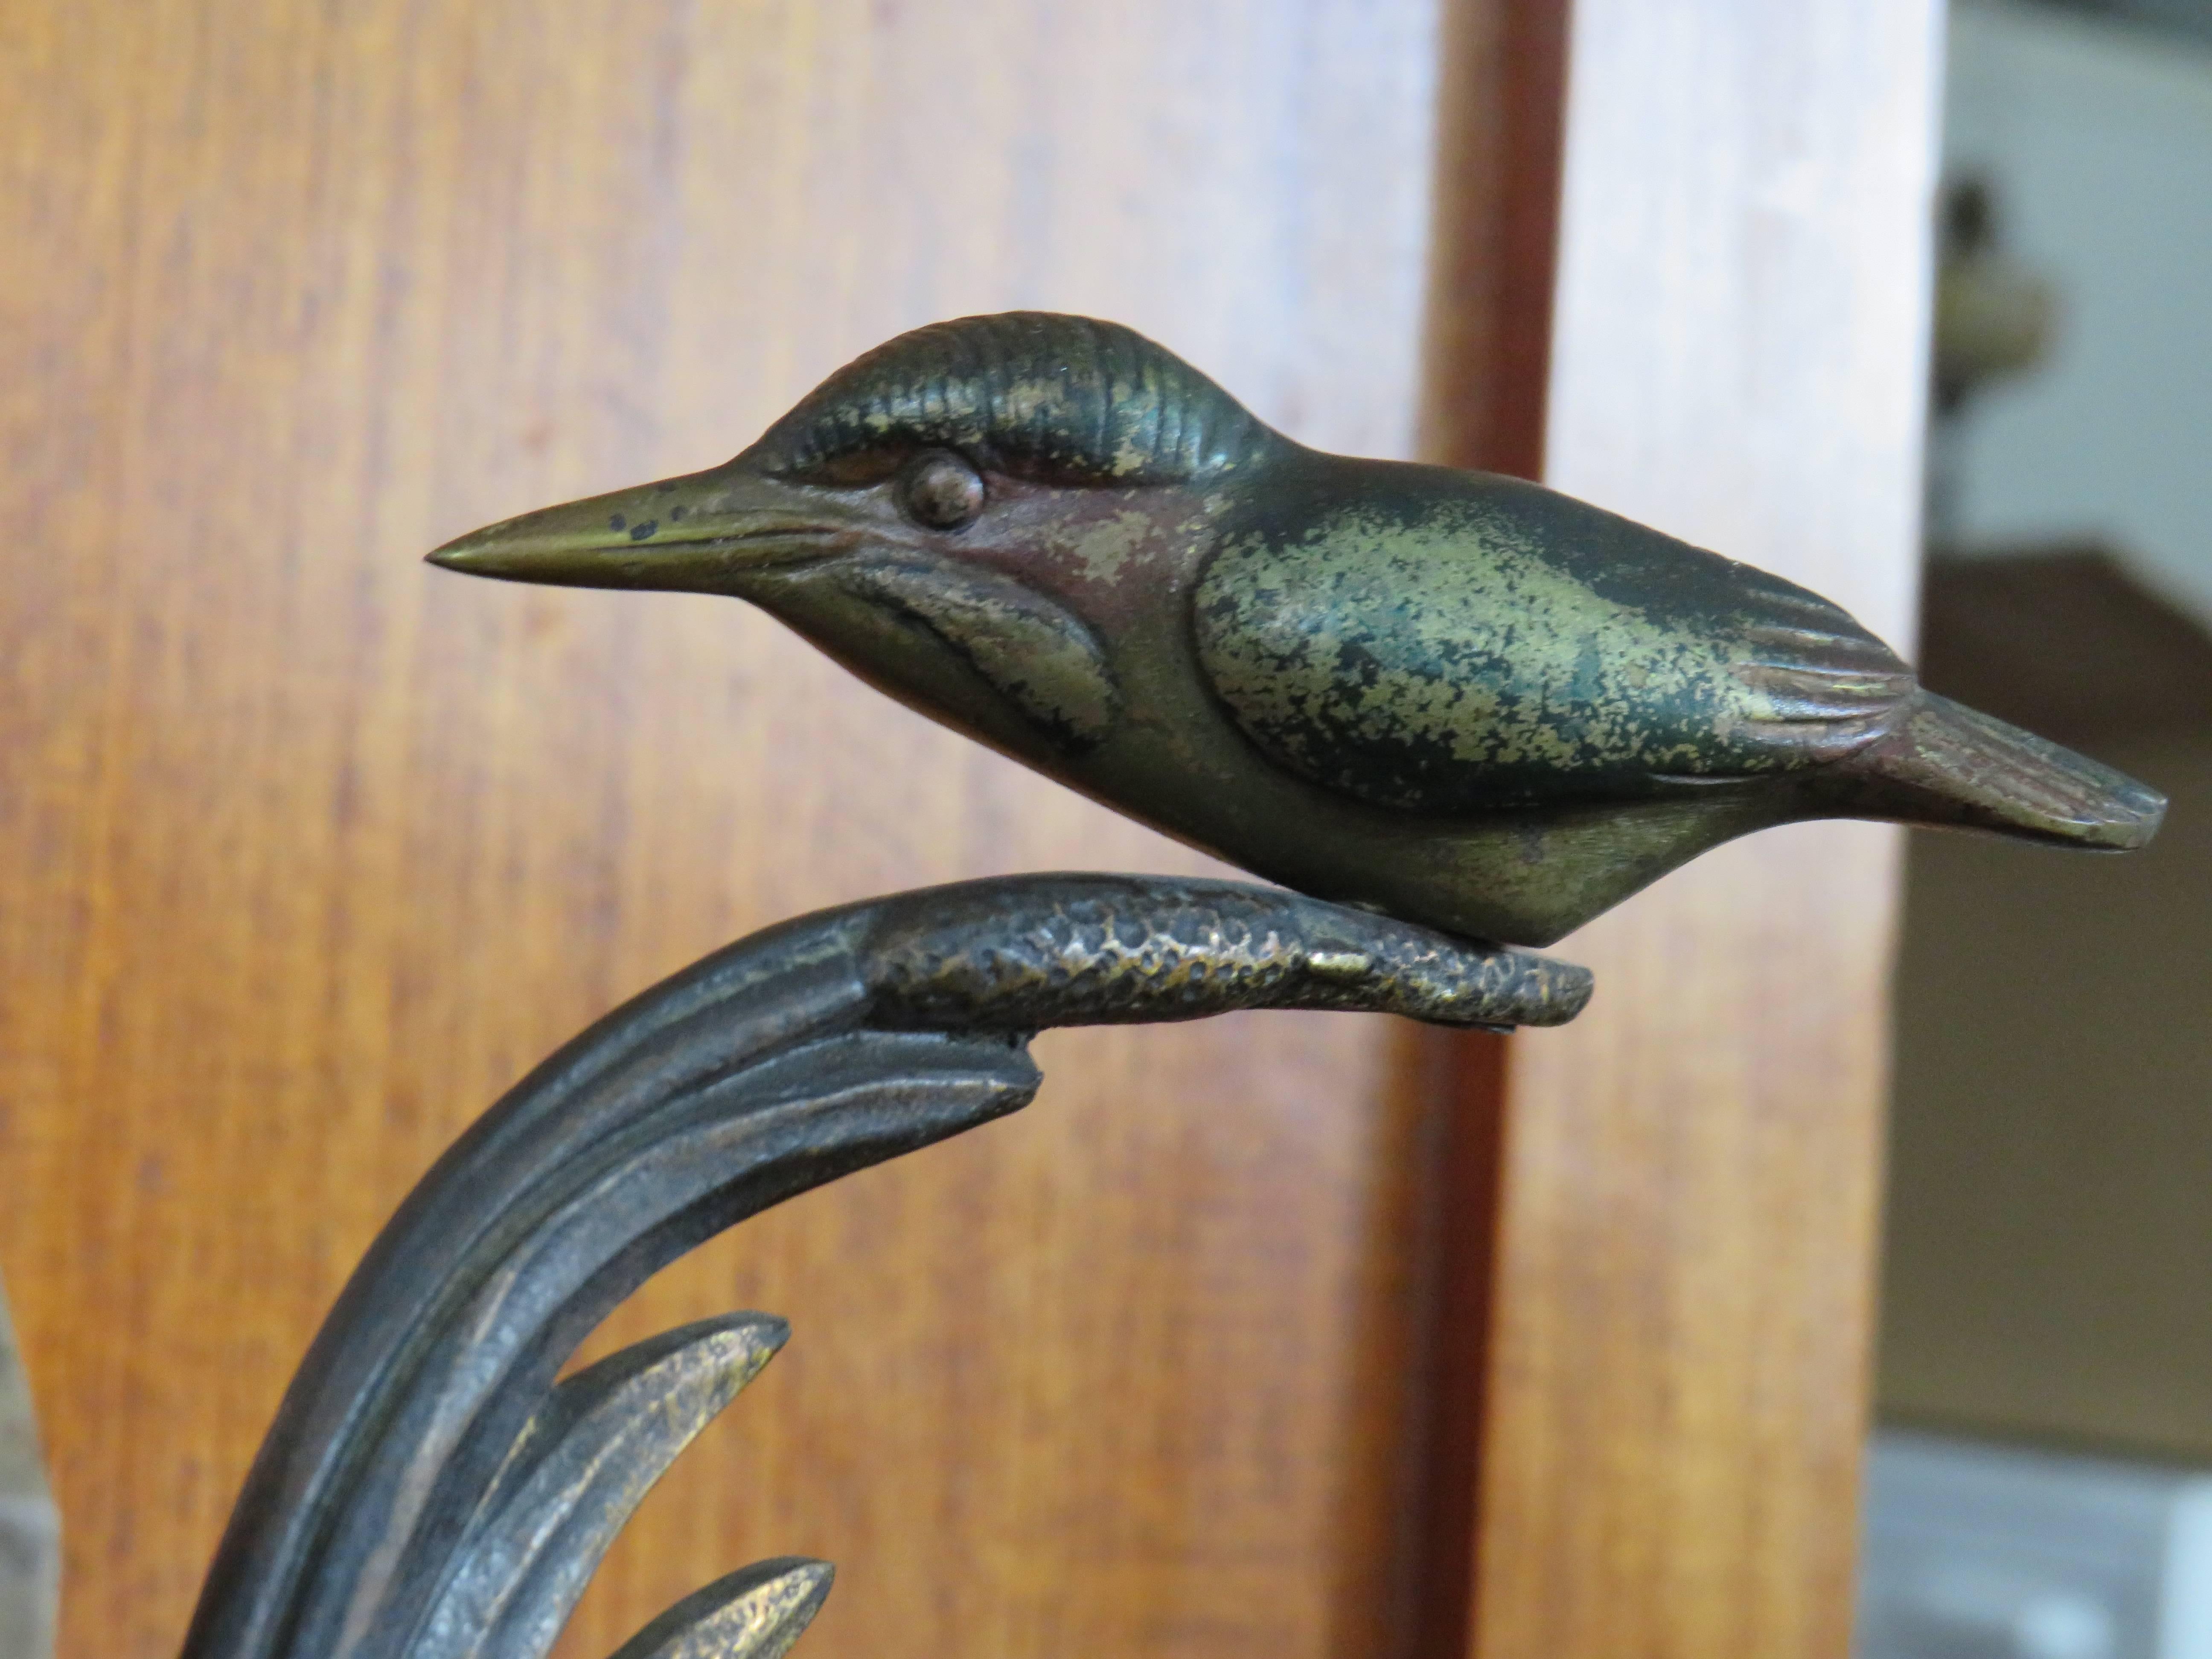 Polished Art Deco Bookends with Cold Painted Bronze Kingfisher Birds on Marble Base